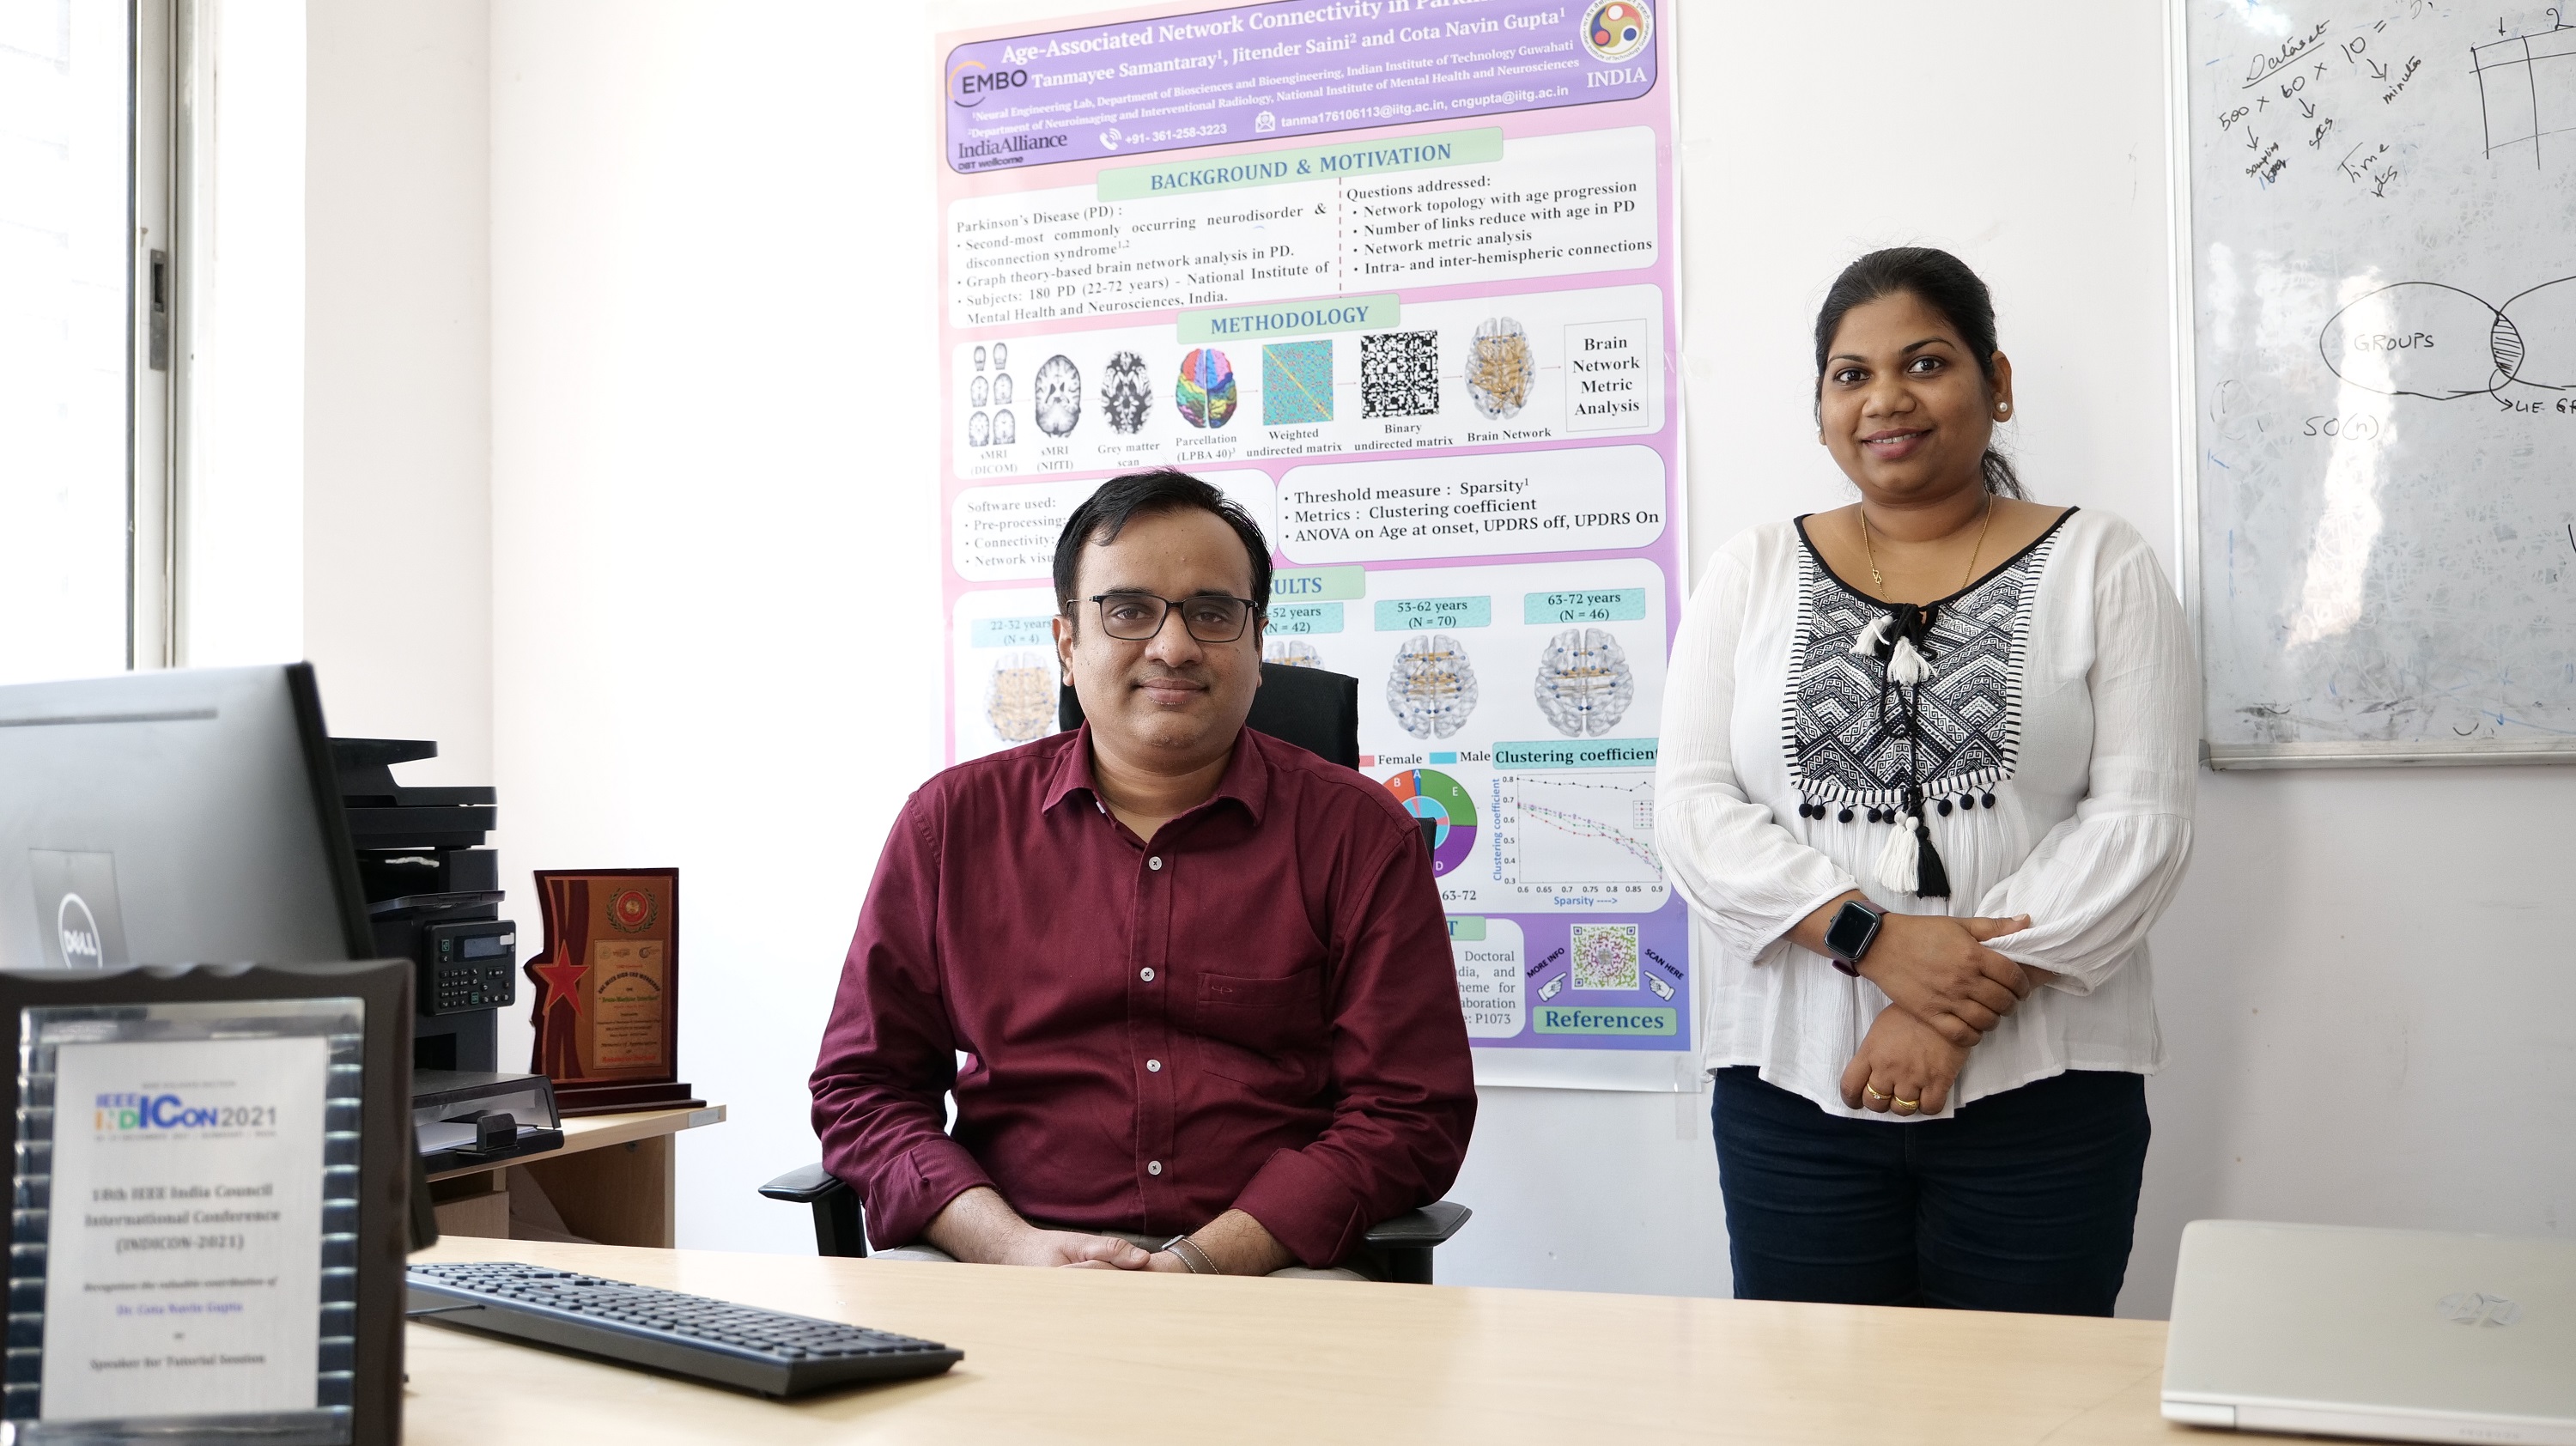 Encoding the Human Brain: IIT Guwahati’s Novel Algorithm may code Brain Connectivity Patterns of Healthy and Parkinson’s patients into a numerical representation